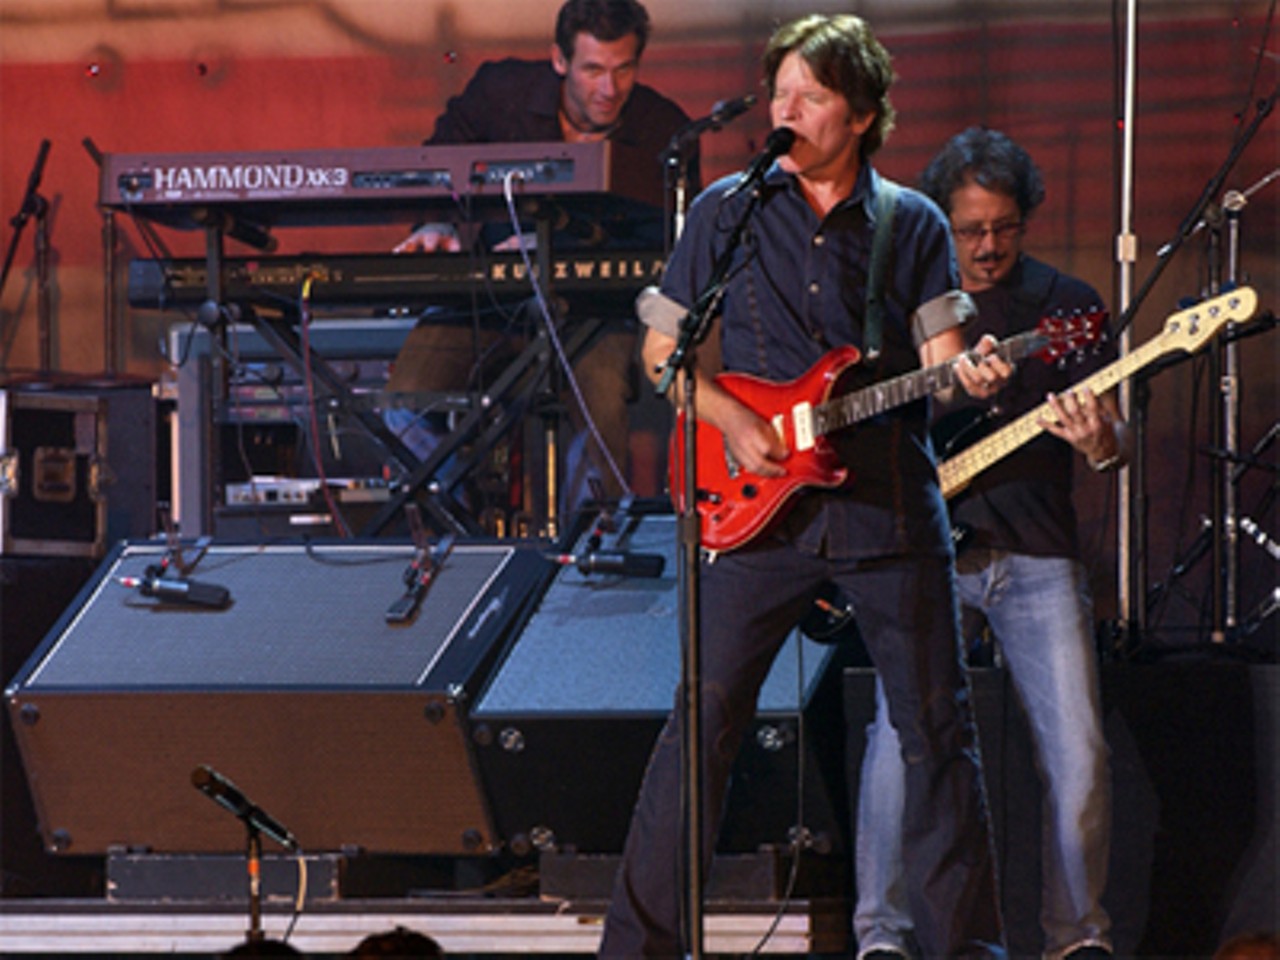 John Fogerty  in 2005 at Riverport Amphitheater (now known as Verizon Wireless Amphitheater.)